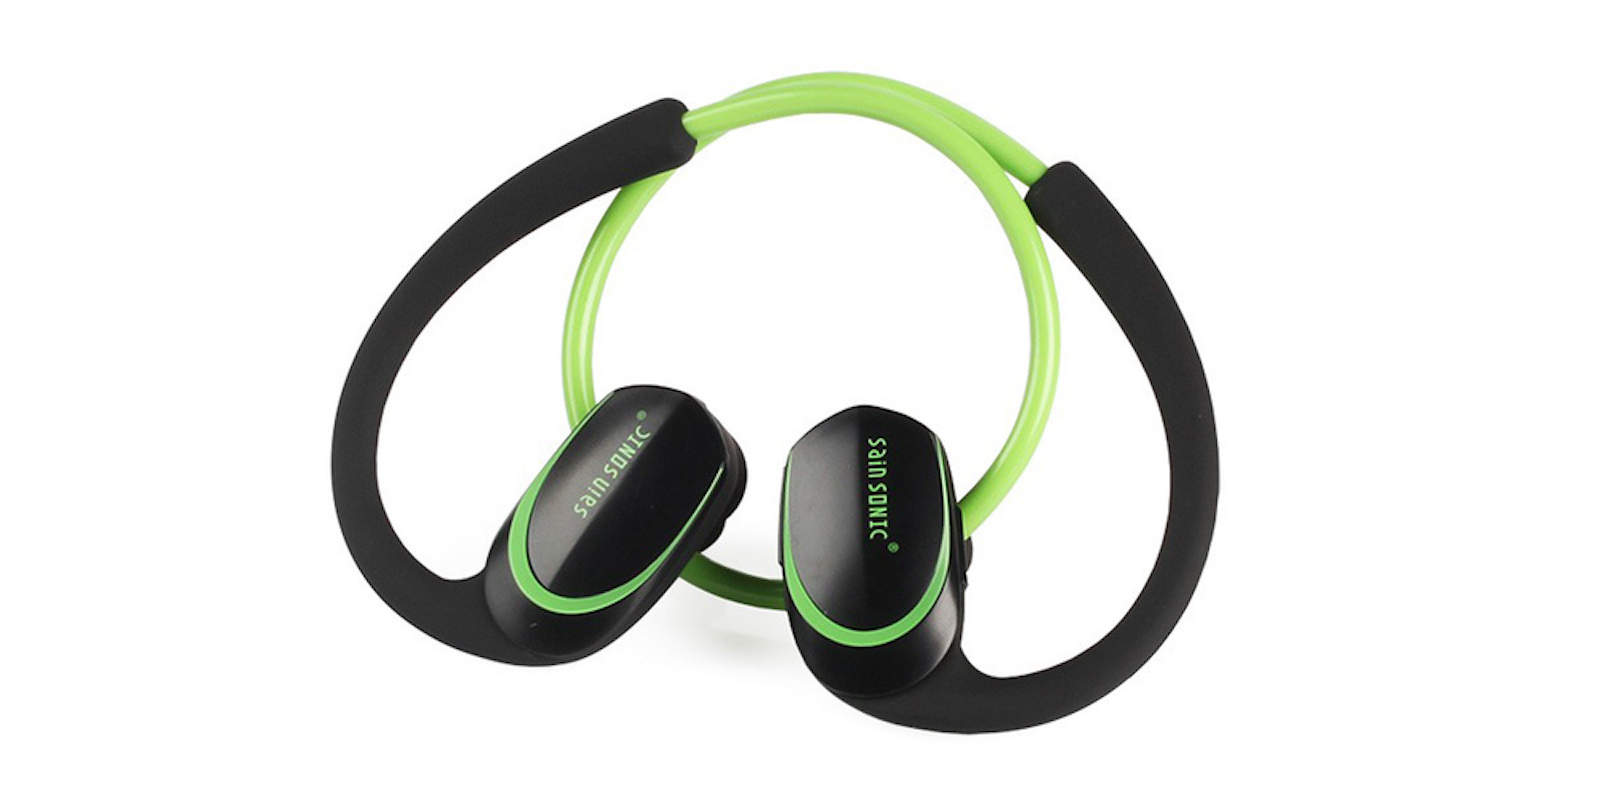 These earphones won't tangle or catch as you go about your day